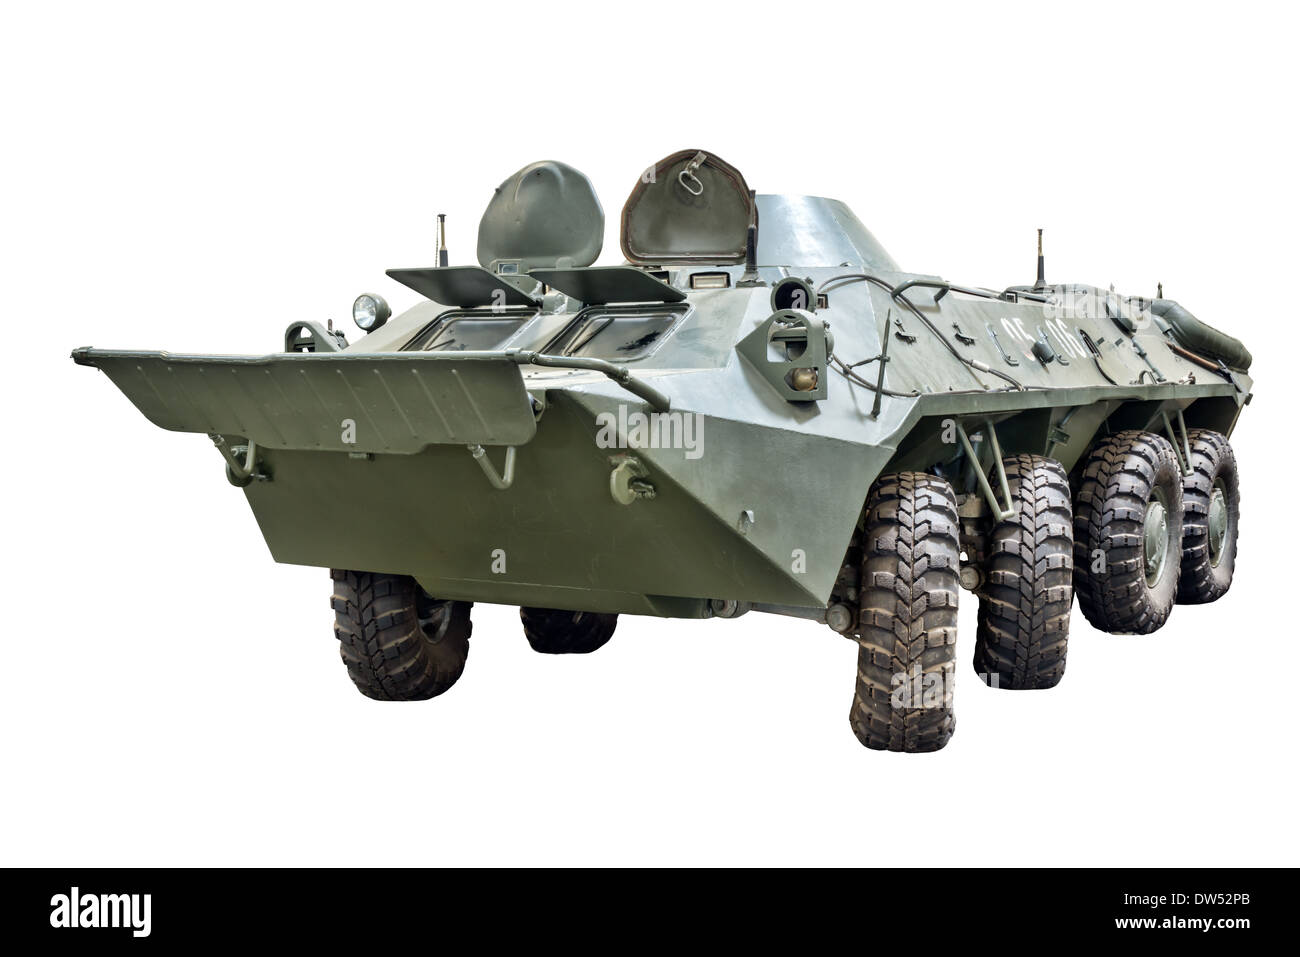 A cut out of a Soviet BTR 70 armoured personnel carrier used by Russian forces & other Warsaw Pact armies Stock Photo